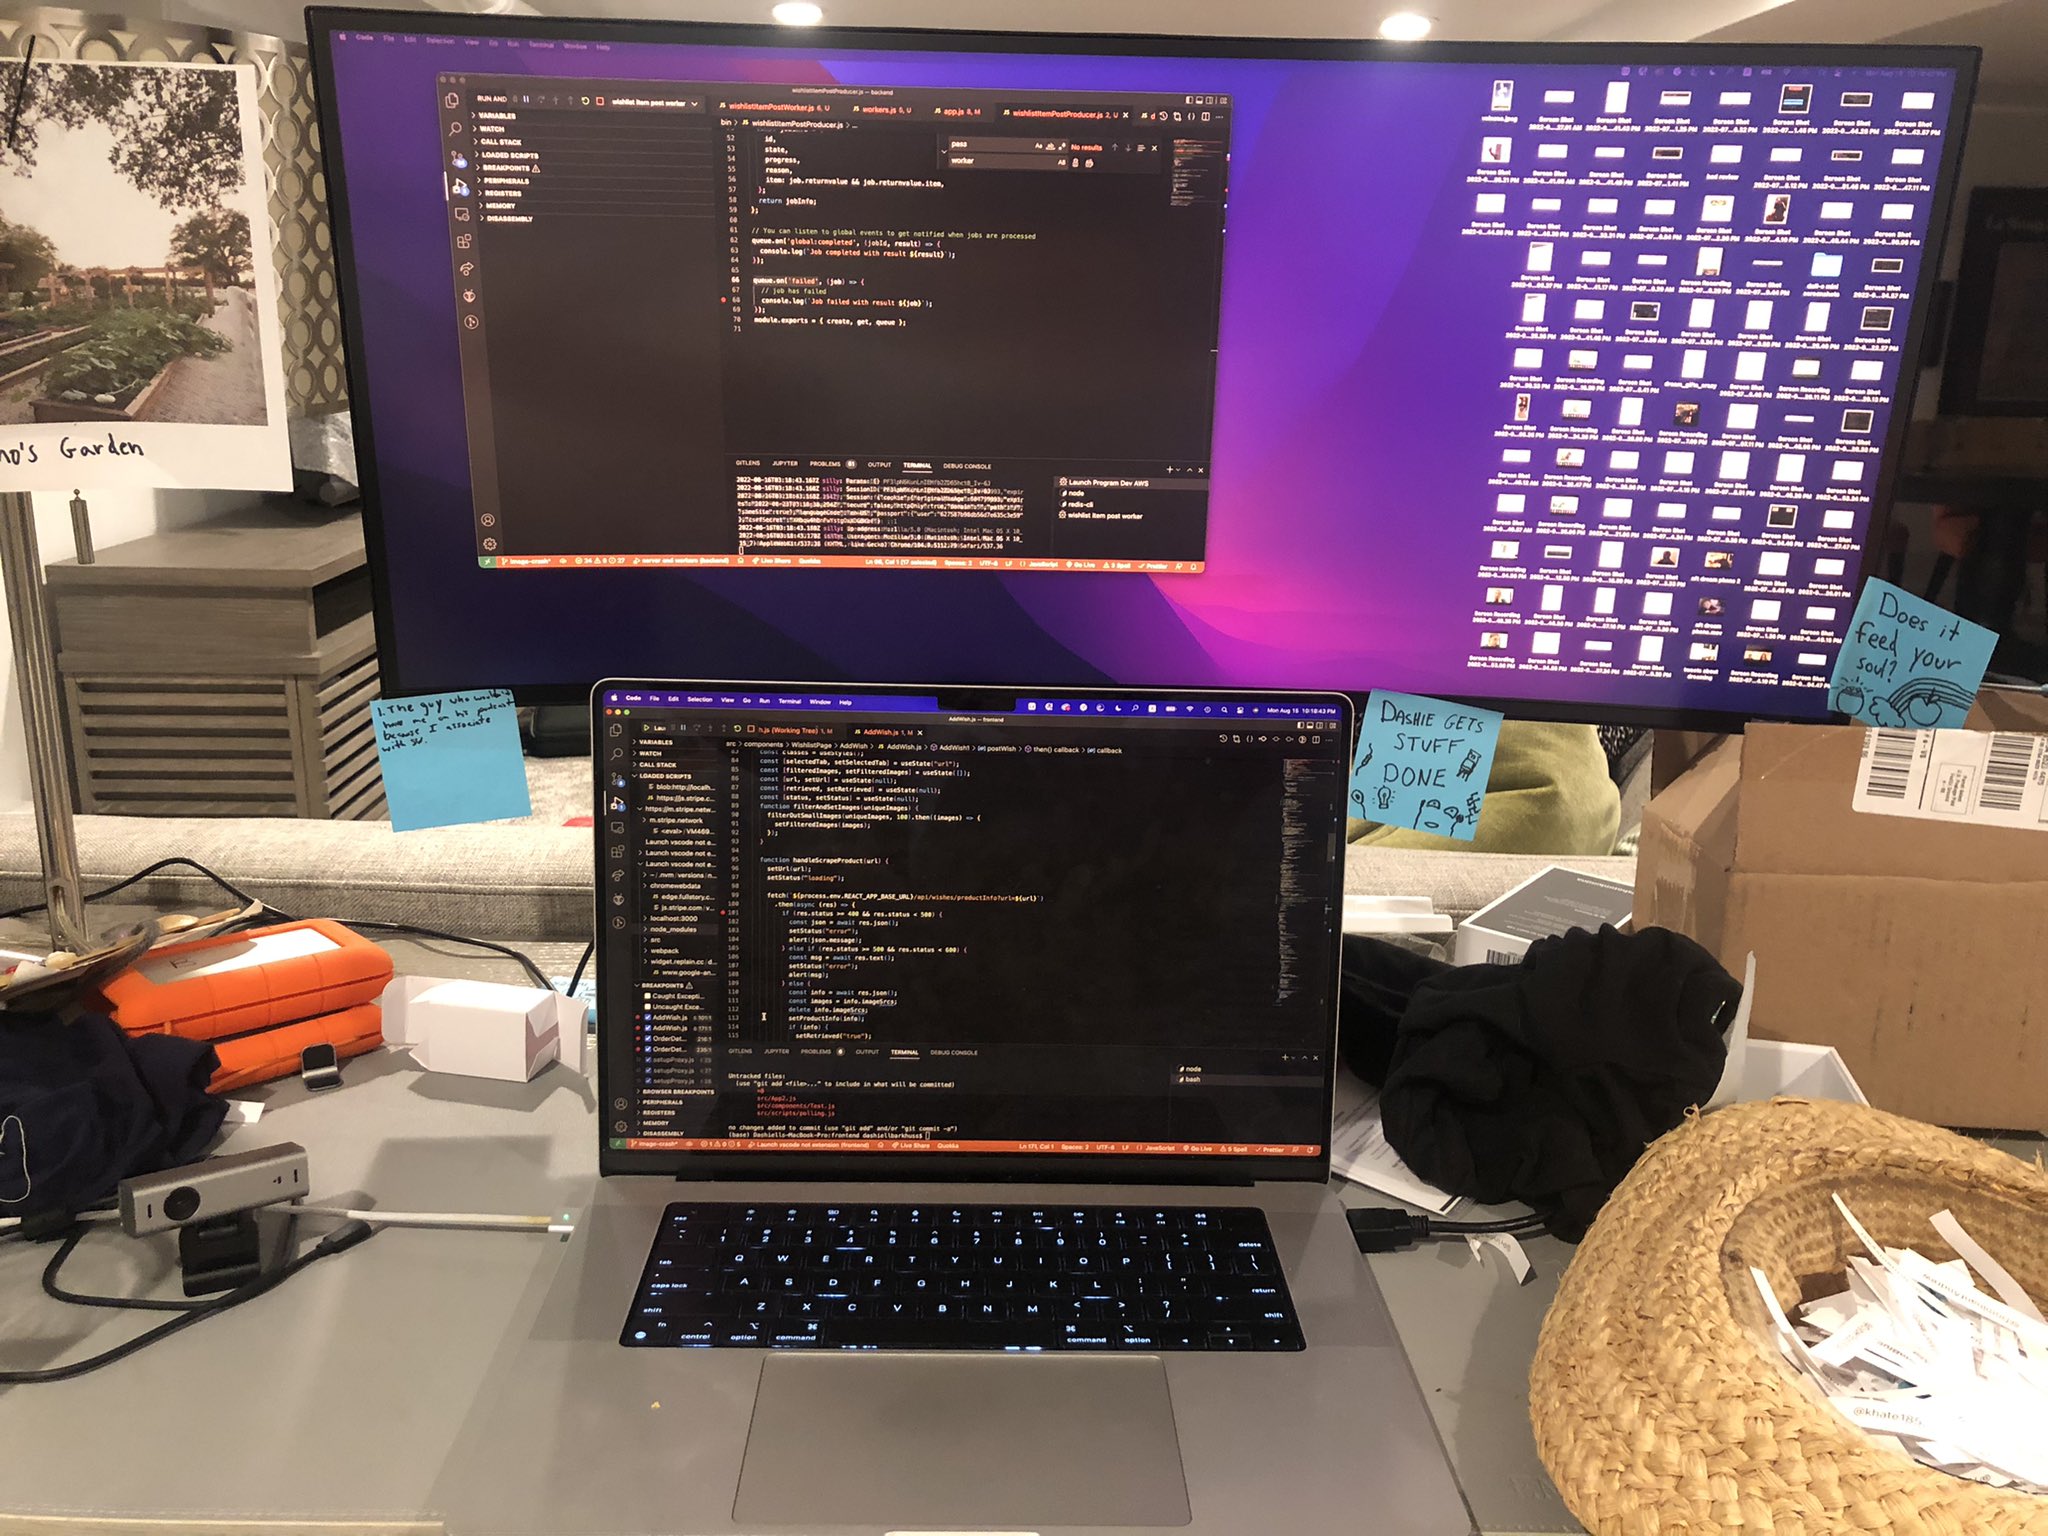 Picture of a desk with monitor. VS Code can be seen on the monitor.